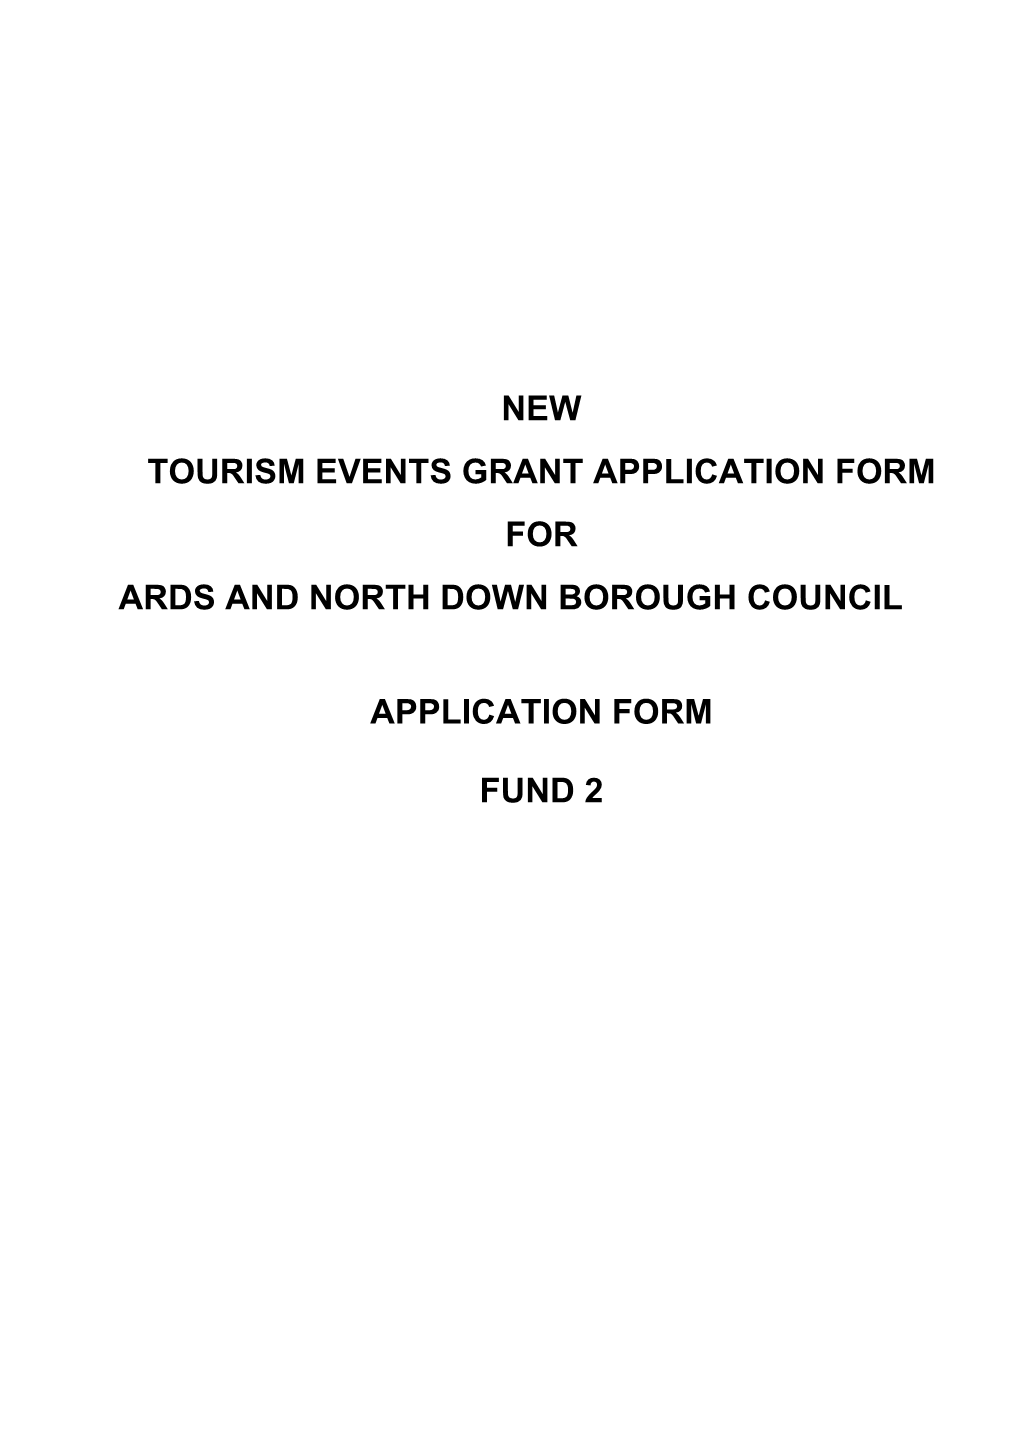 New Tourism Events Grant Application Form for Ards